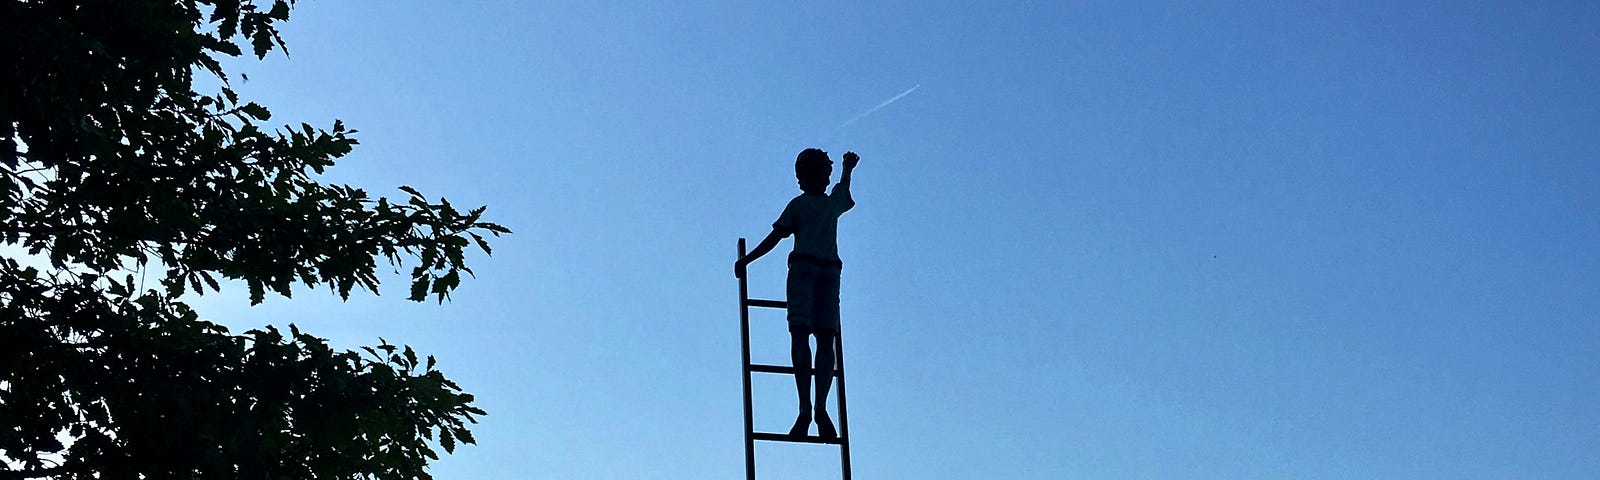 A young VP practices climbing the corporate ladder in hopes of reaching his own private jet.